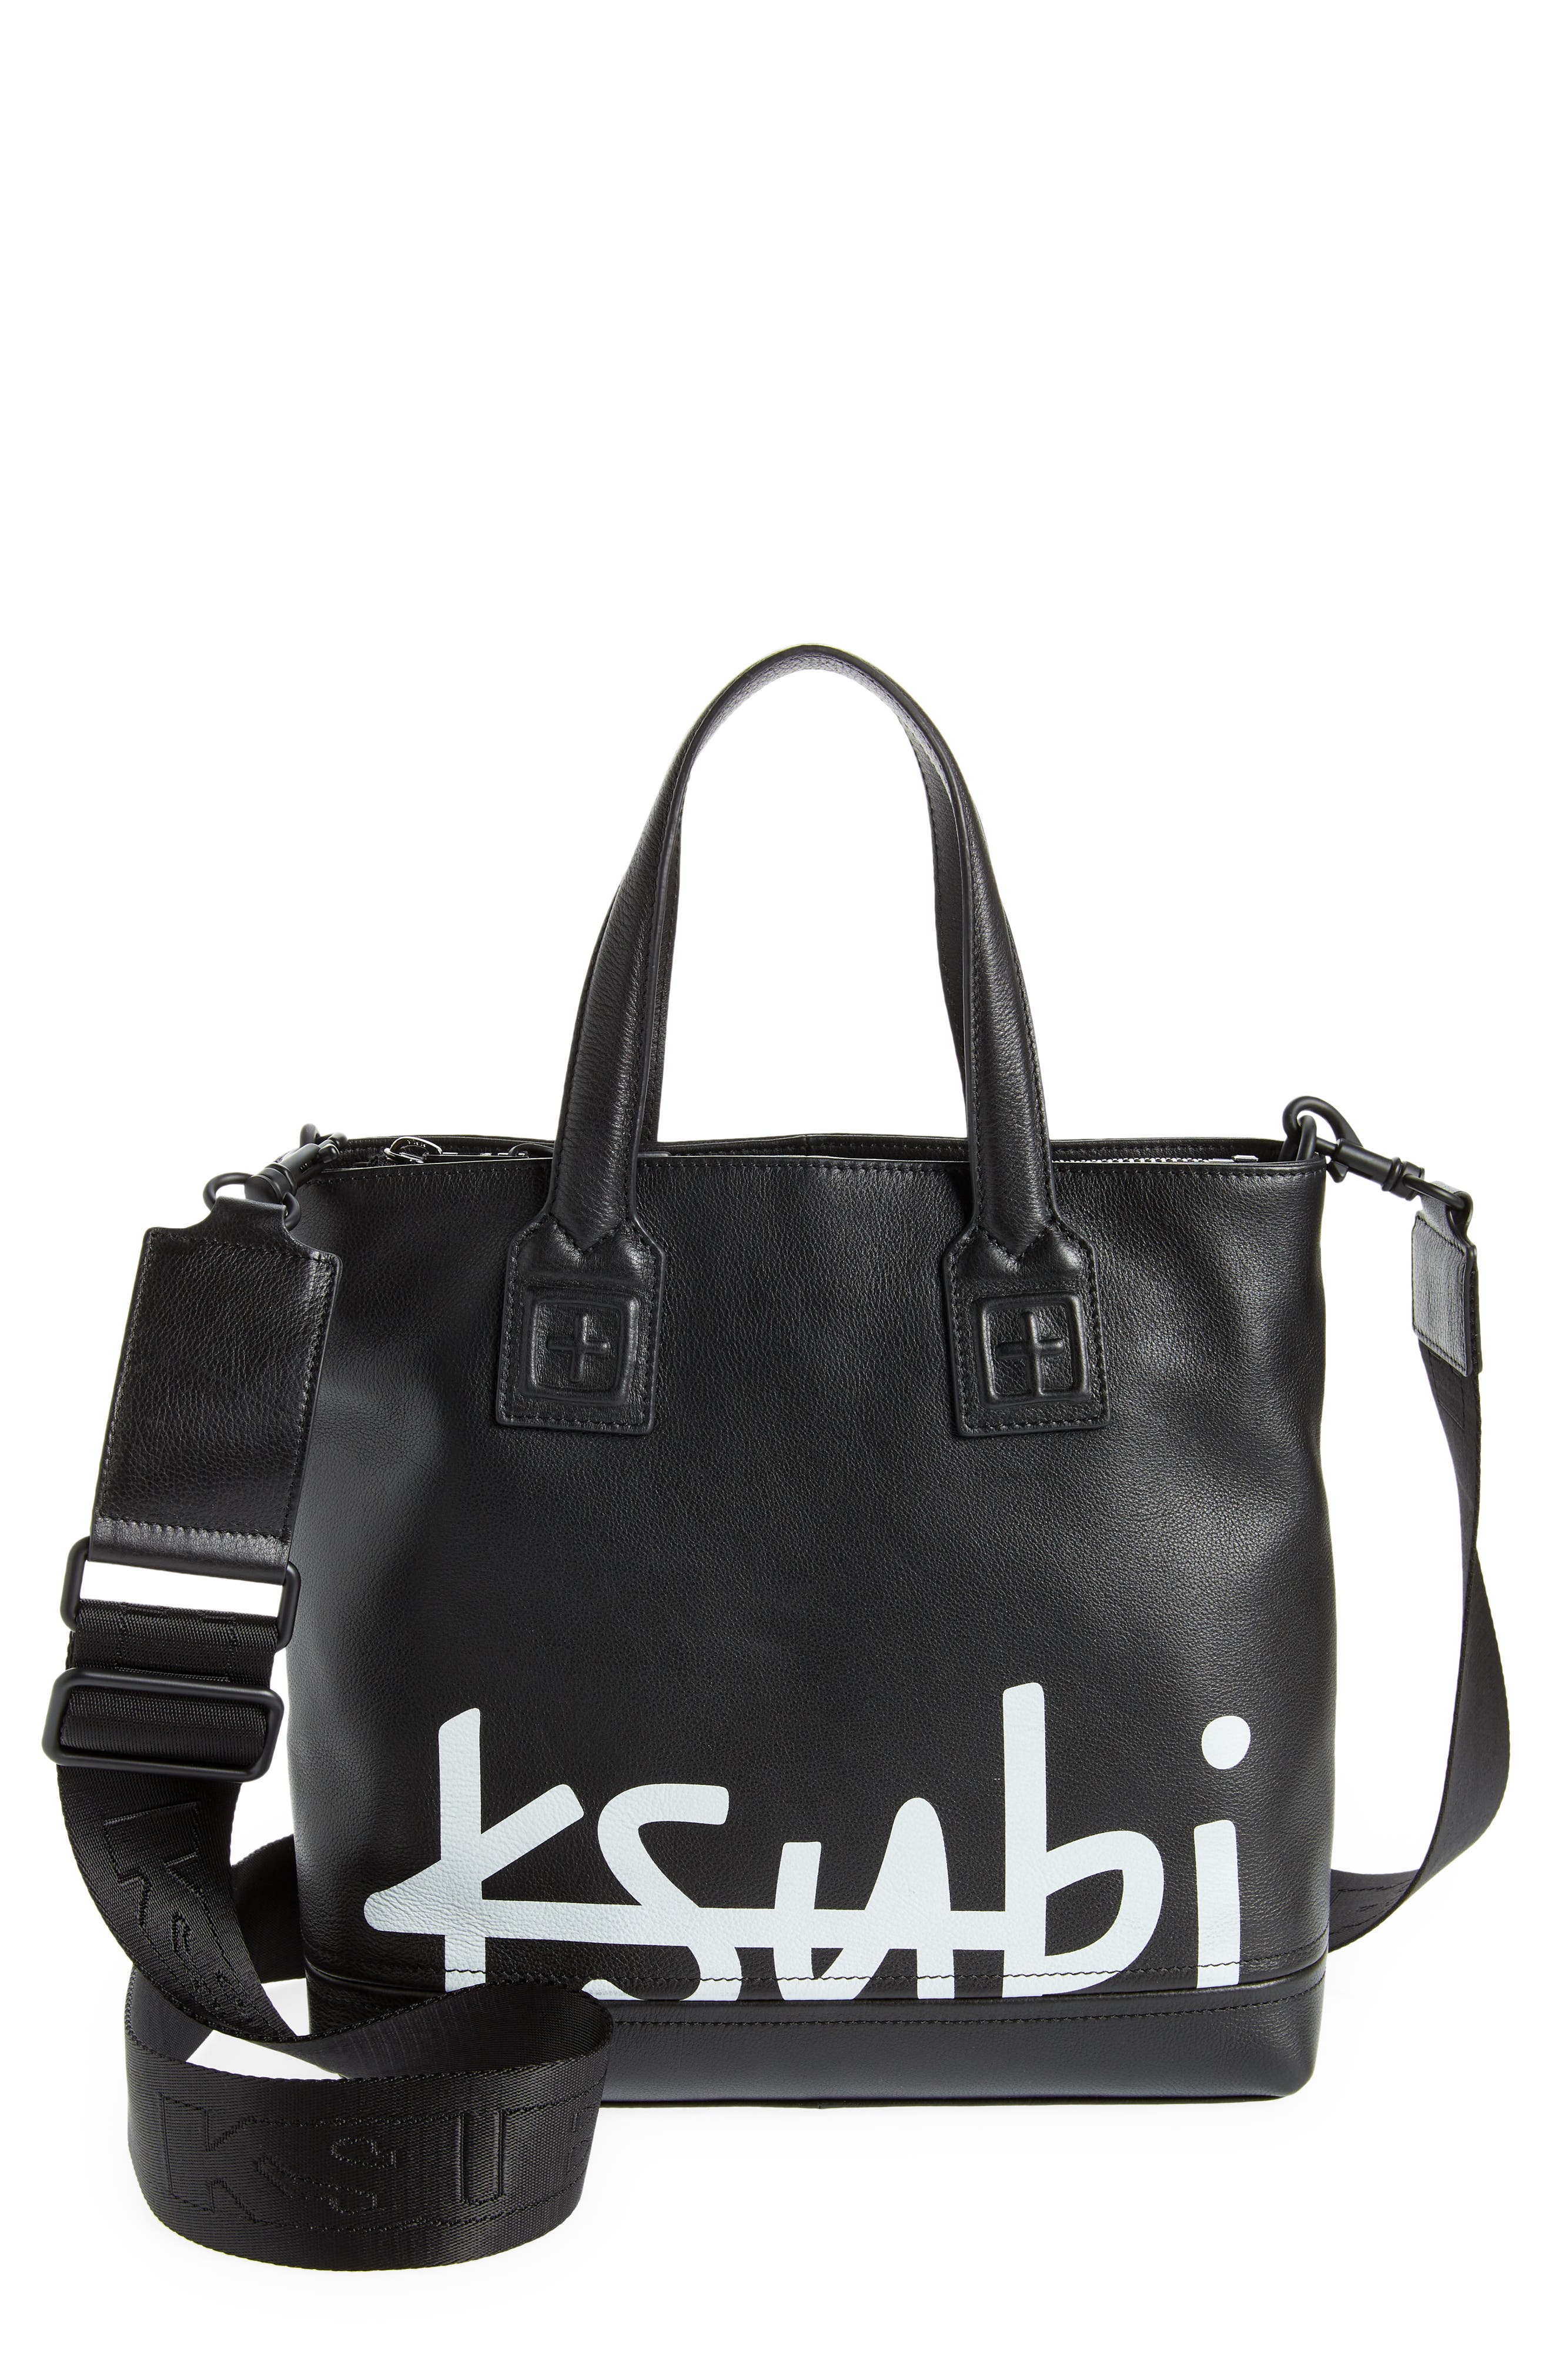 Ksubi Kollector Mini Leather Tote in Assorted at Nordstrom